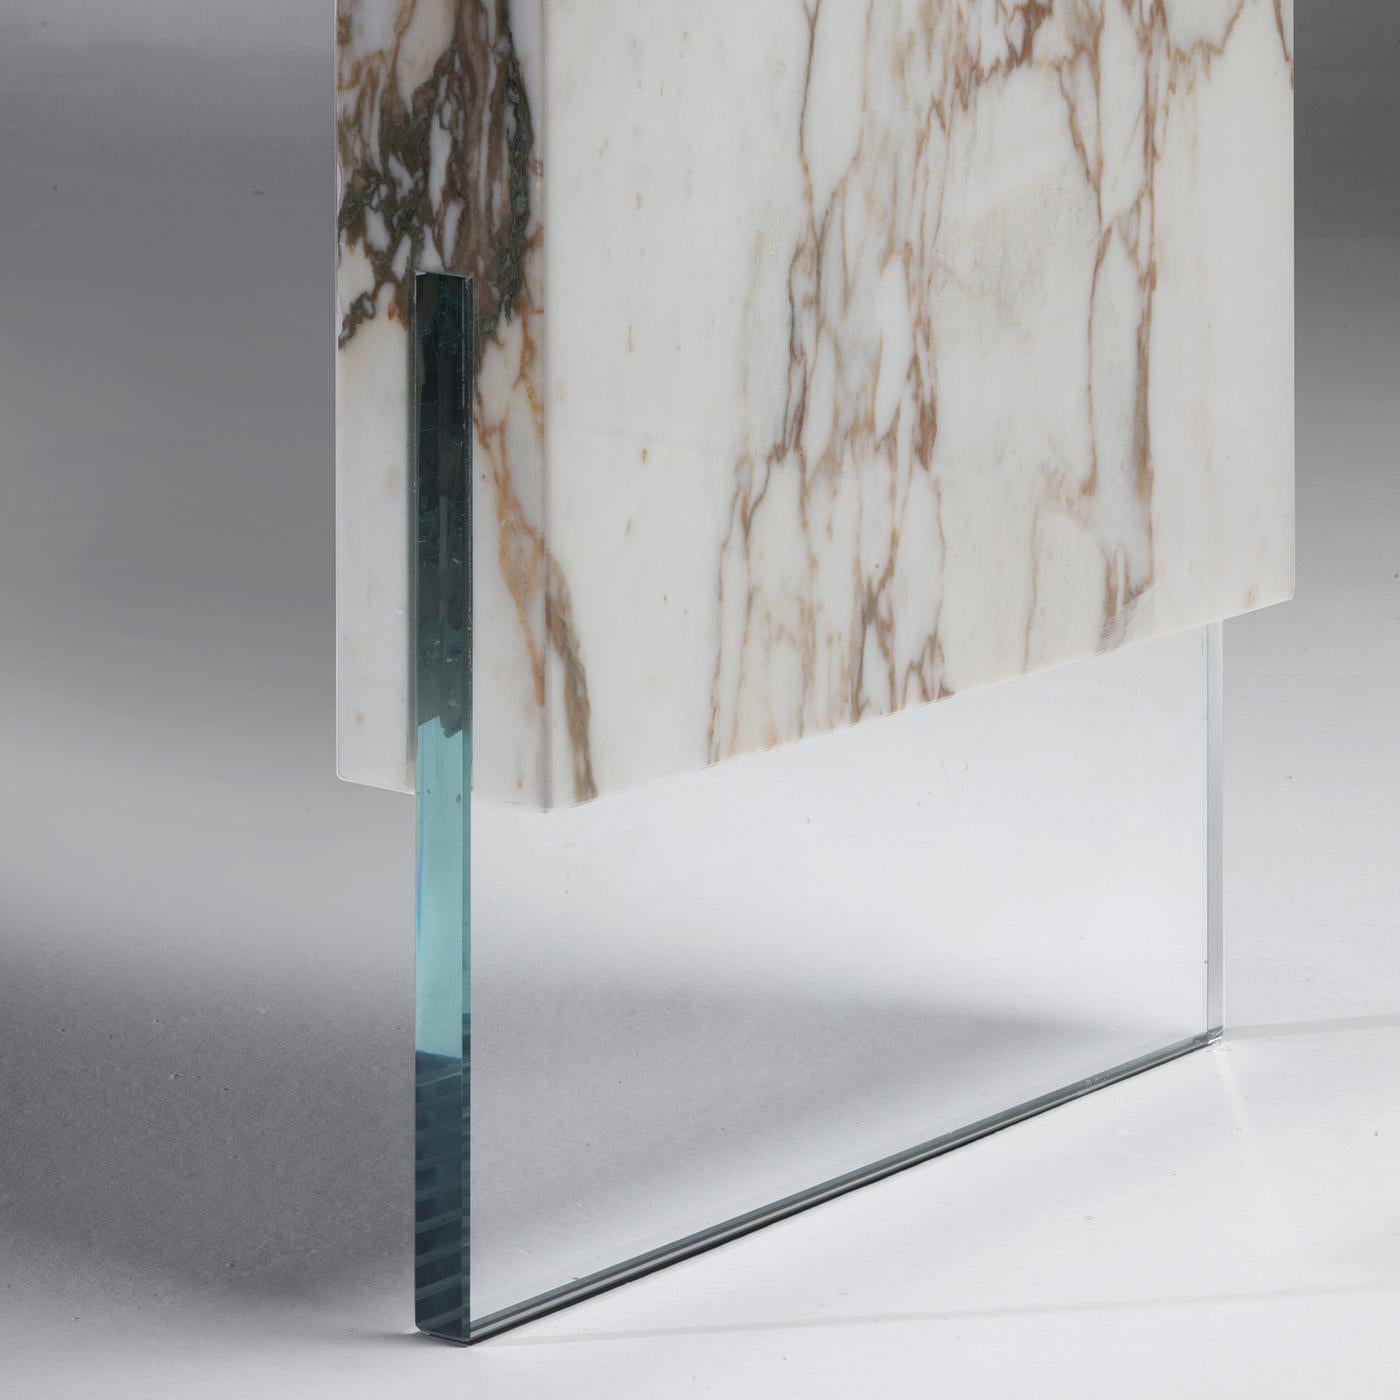 This superb, limited-edition console is a reinterpretation of classic furniture in its linear, essential volumes. A masterpiece that will captivate the imagination in a modern home, it is crafted using precious Calacatta Vagli Oro marble fashioned